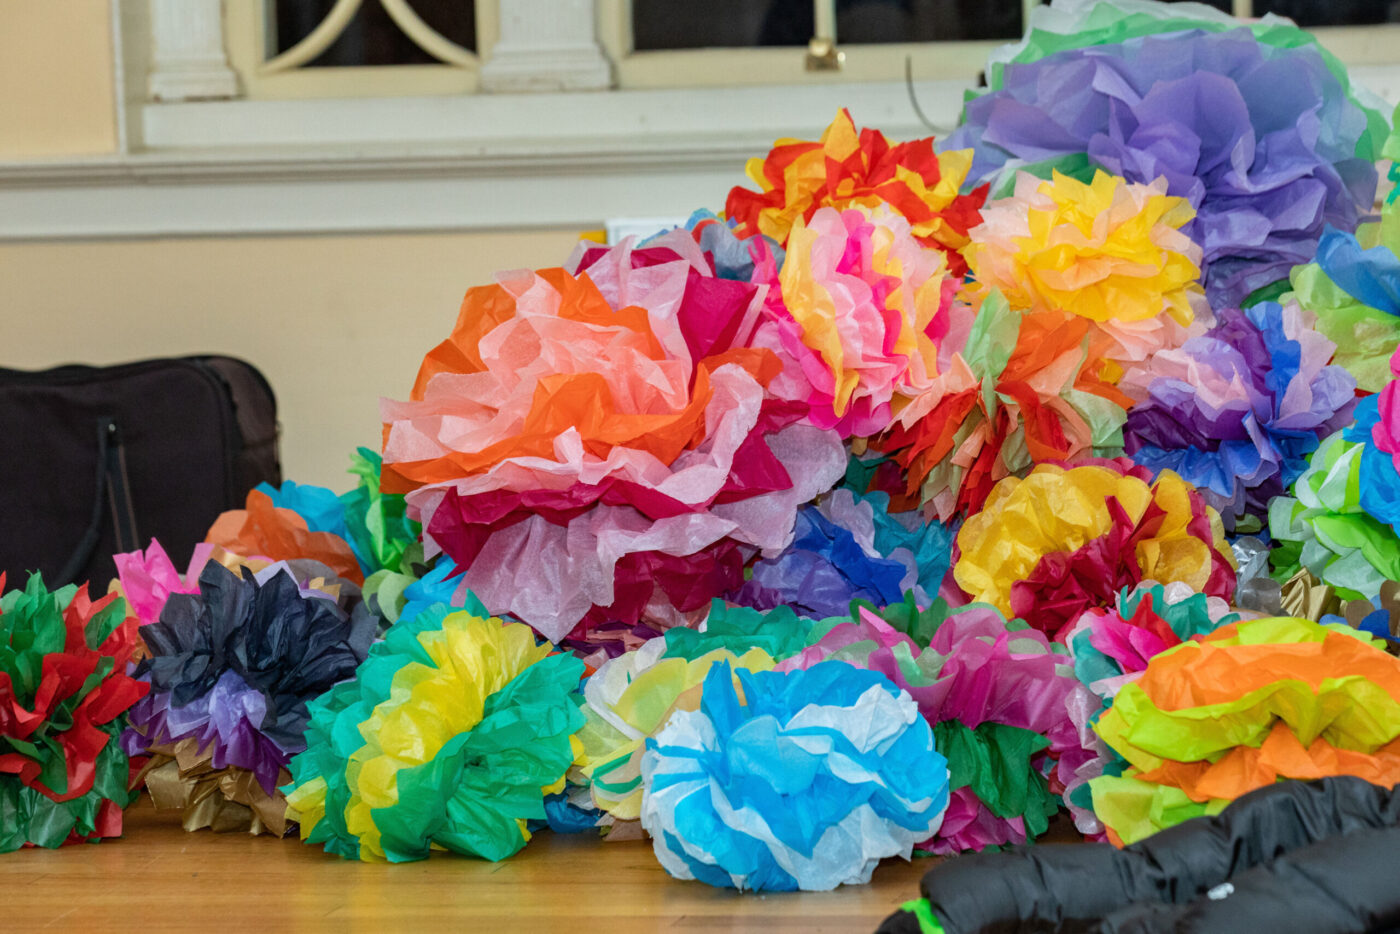 A vibrant array of paper flowers, artfully arranged on a wooden surface.